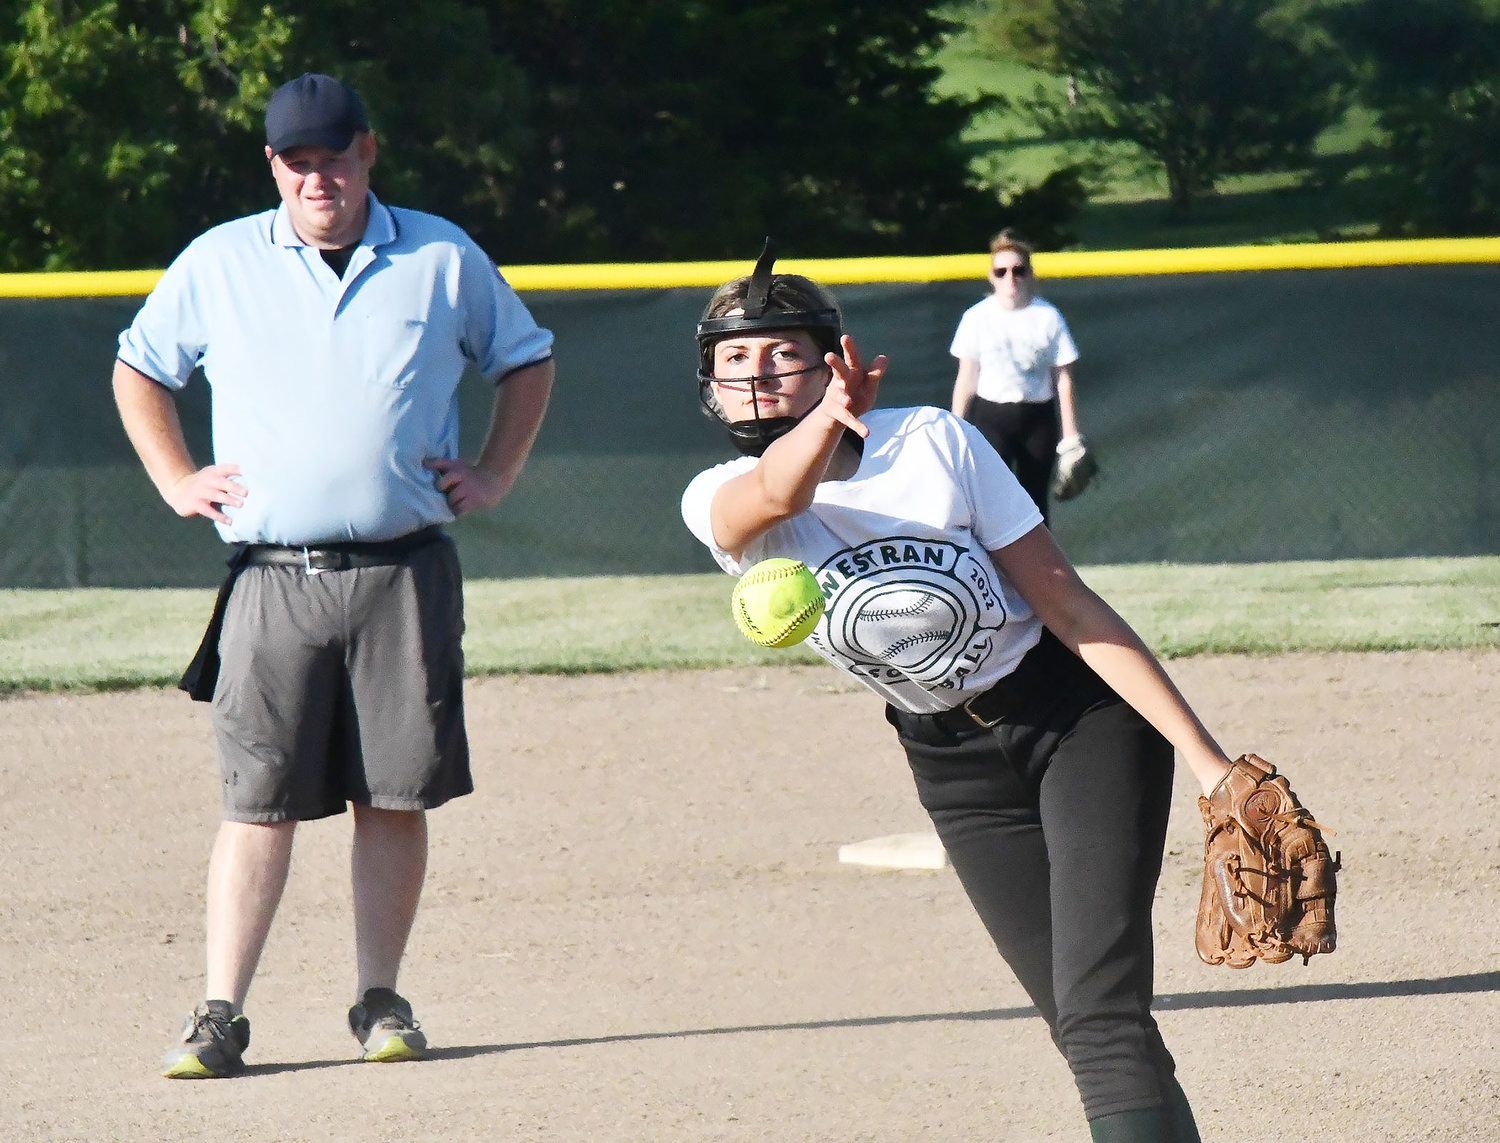 Westran pitcher Kyleigh Carroll throws toward home plate during the first scrimmage as umpire Calvin Huntsman looks on at left.